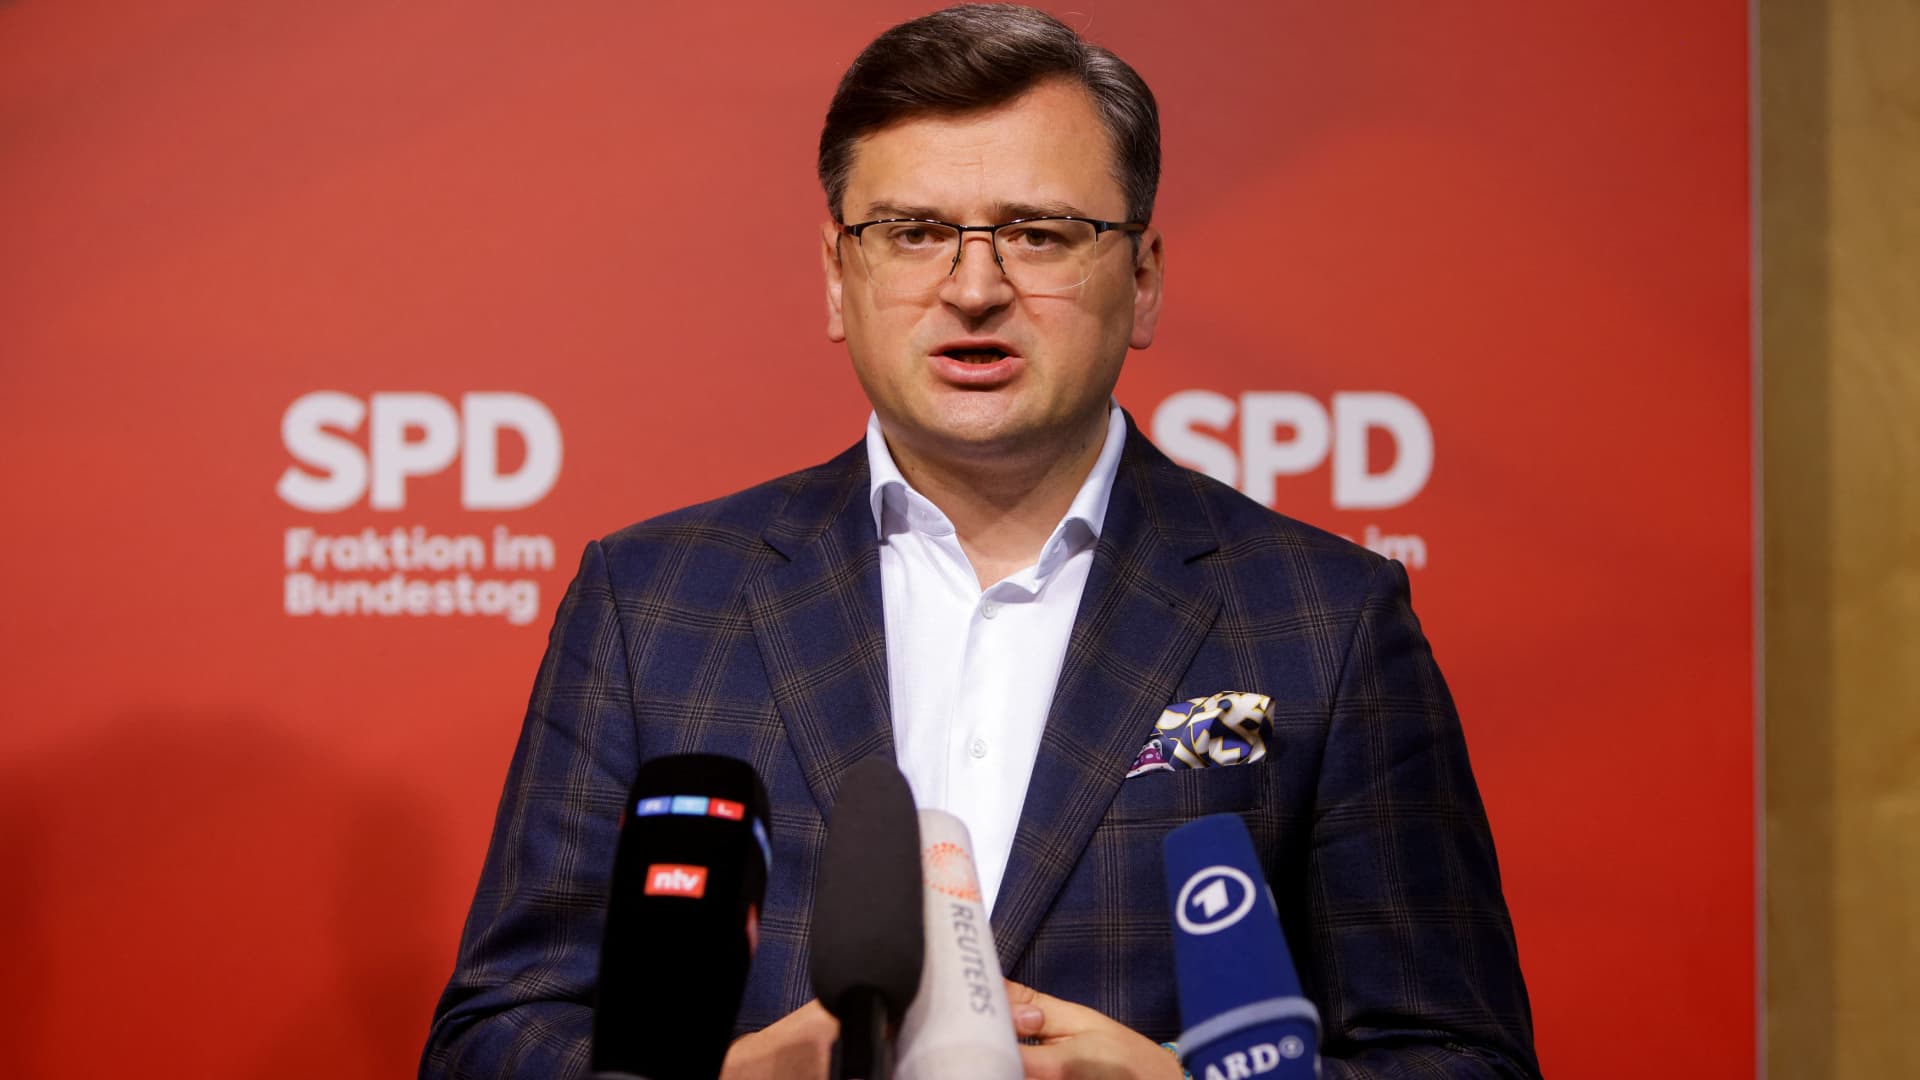 Ukraine's Foreign Minister Dmytro Kuleba speaks as he gives a statement with Germany's Social Democratic Party (SPD) parliamentary group leader Rolf Muetzenich and SPD co-leader Lars Klingbeil, after a meeting amid Russia's invasion of Ukraine, in Berlin, Germany May 12, 2022. 